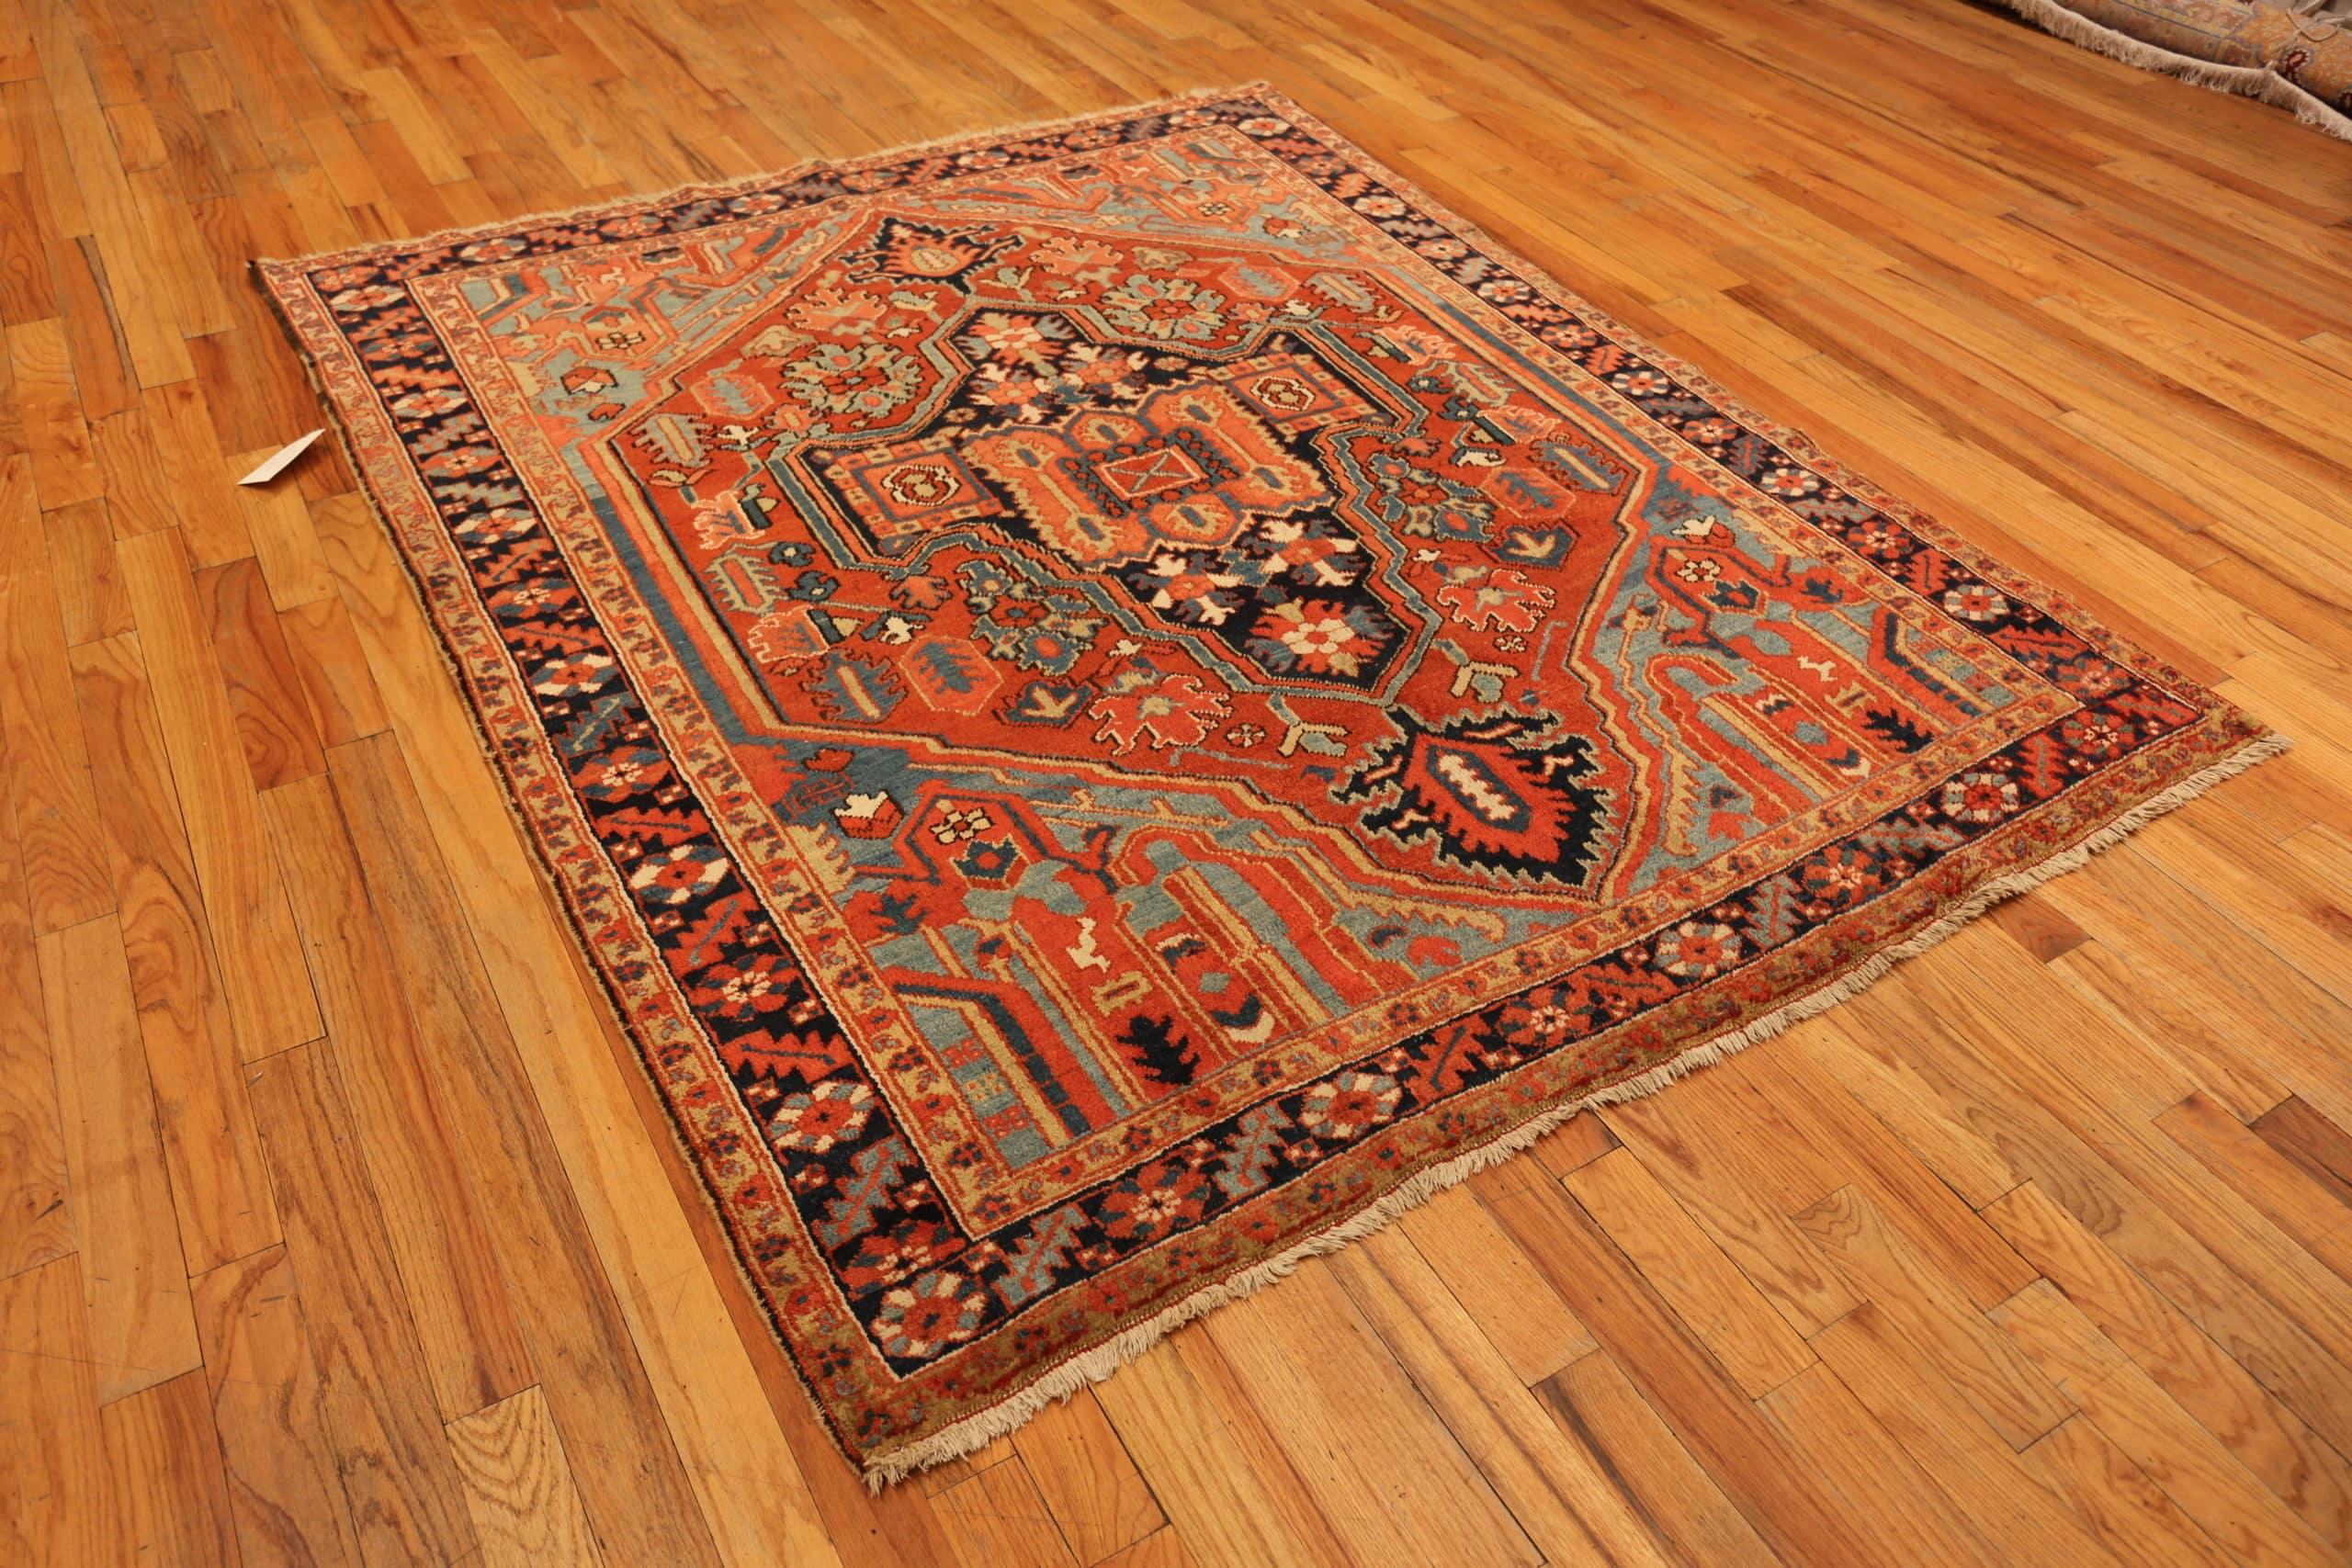 Small Antique Persian Heriz Rug. Size: 6 ft 5 in x 8 ft 1